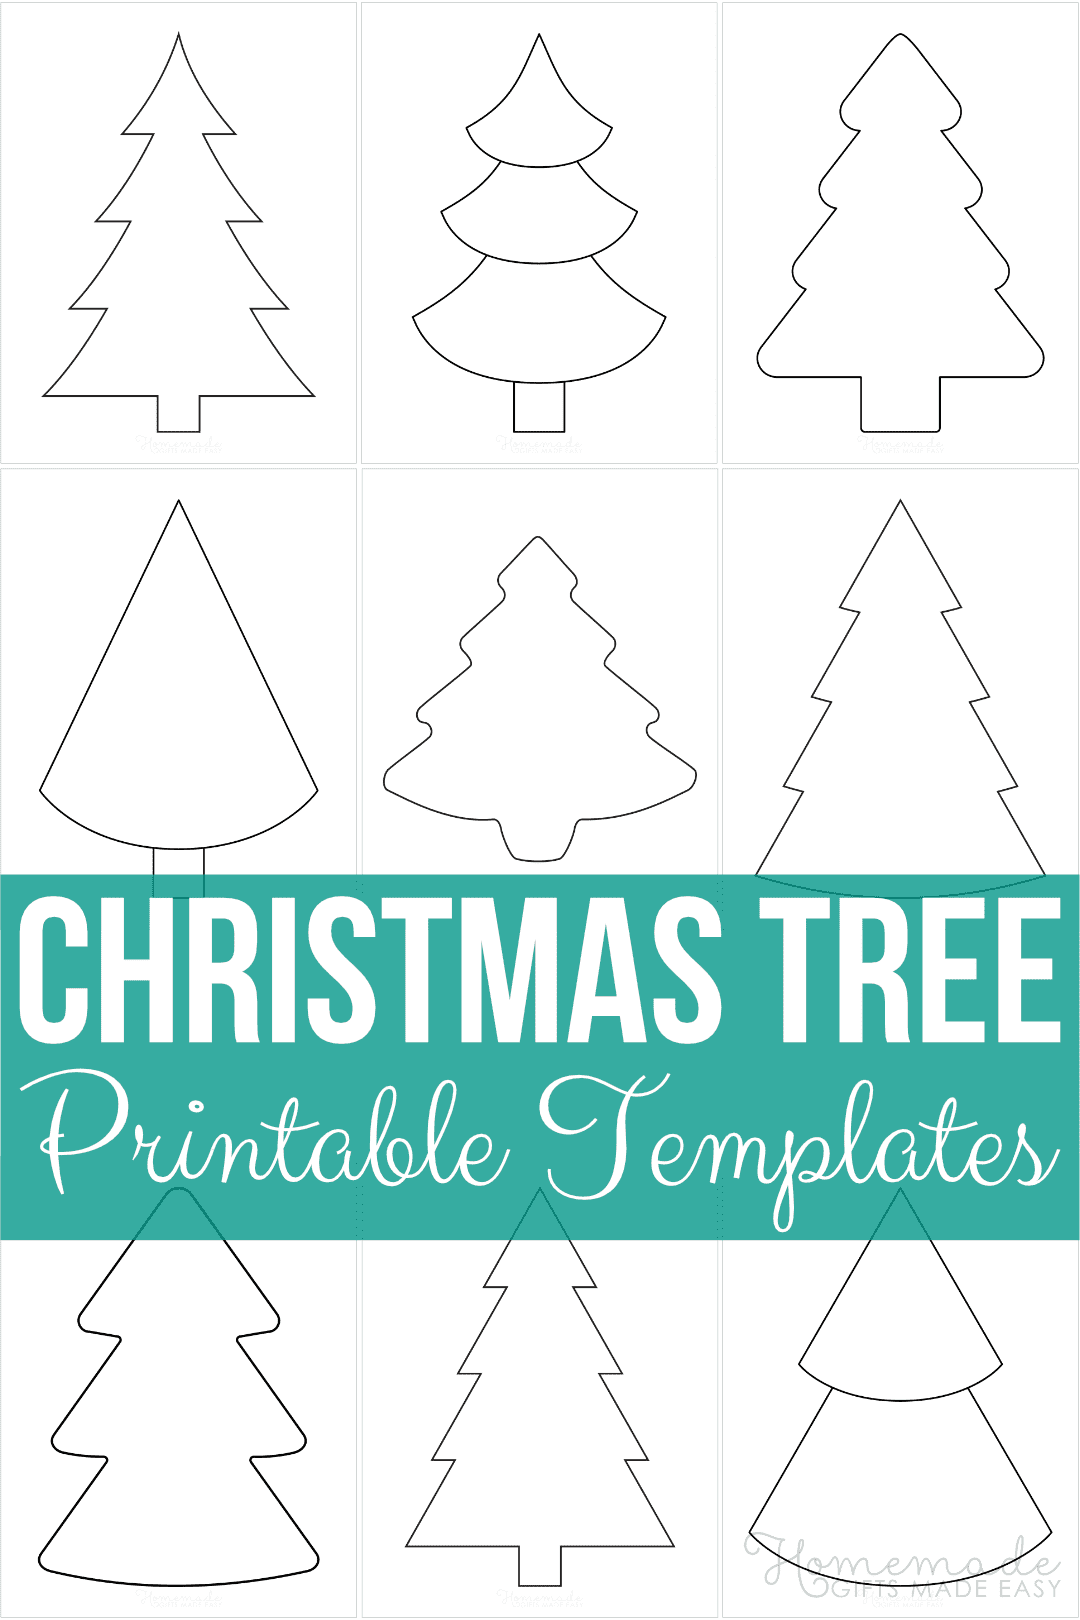 Christmas Tree Templates Free Printable Outlines Patterns in All